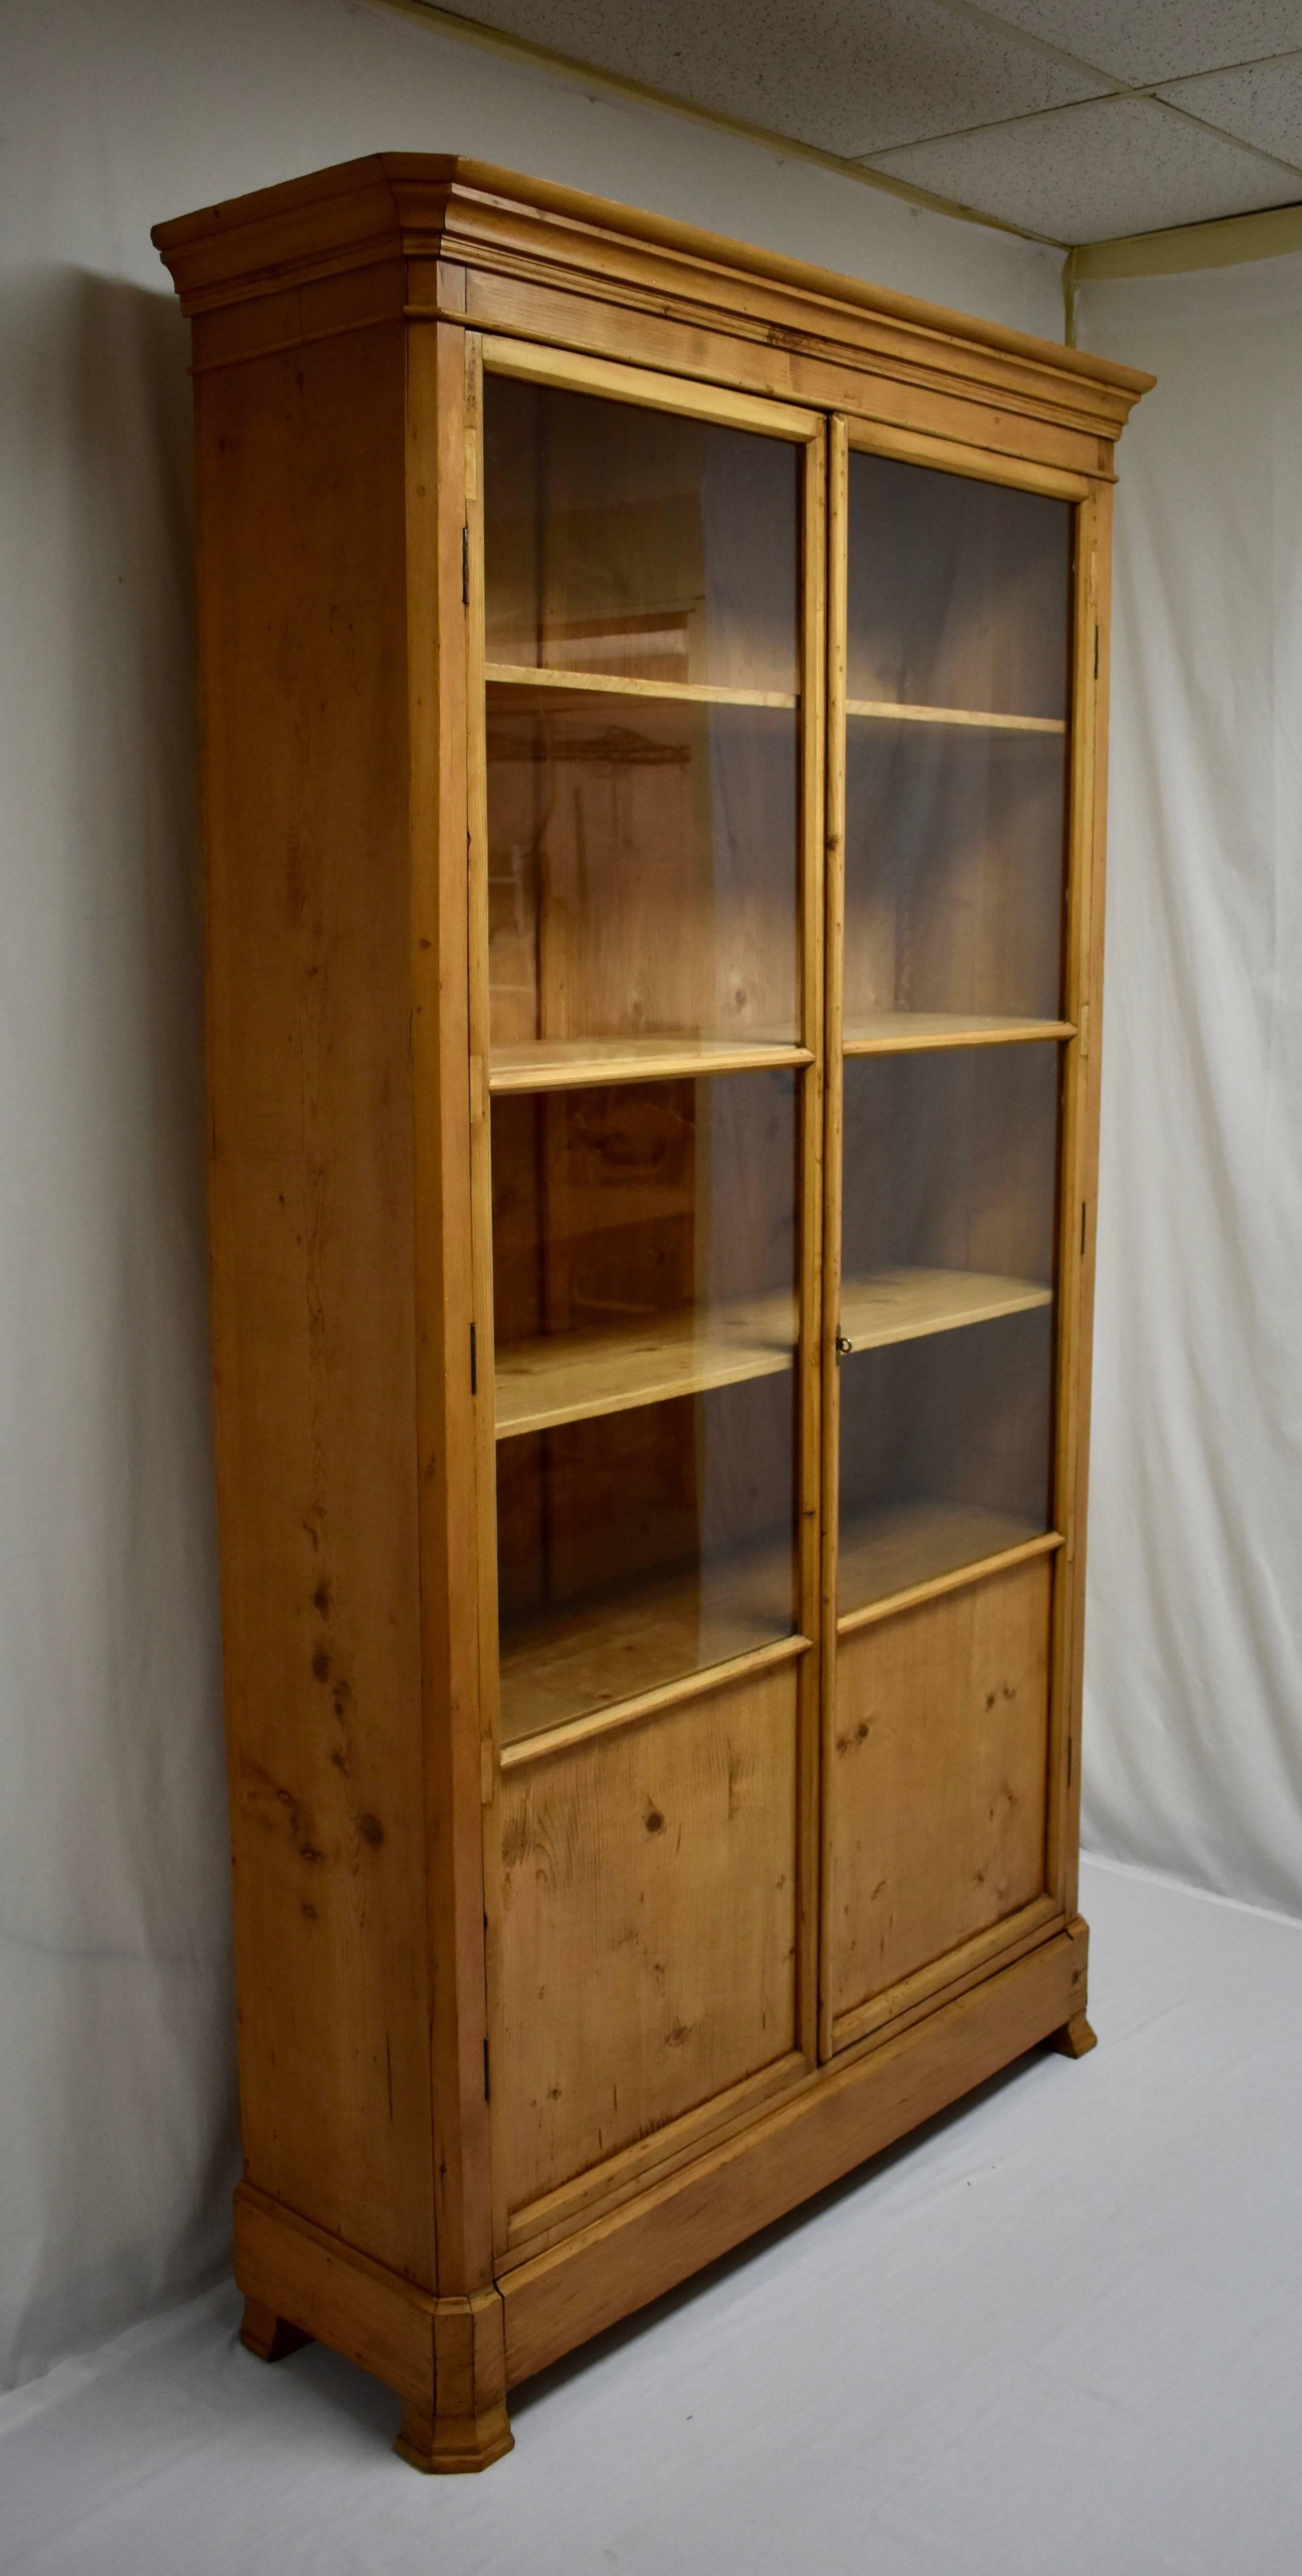 A fine example of the understated elegance of much 19th century French pine furniture, this tall and slender bookcase has been in this dealer's family for the last twenty years, and we rarely acquire such pieces now. Beneath a Classic French ogee